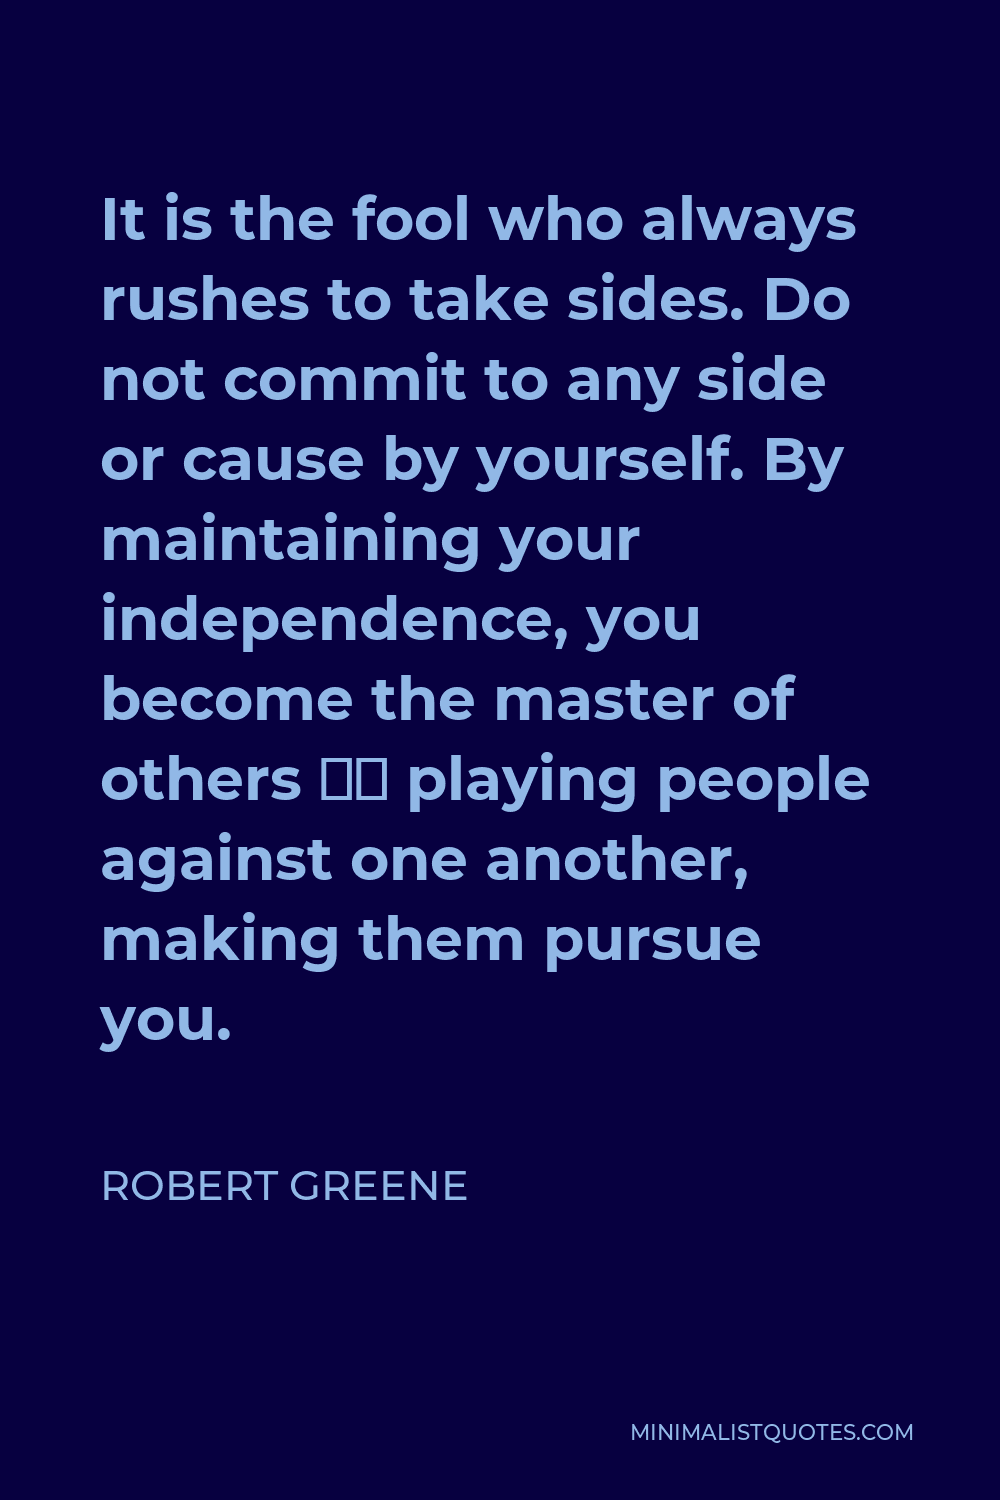 Robert Greene Quote - It is the fool who always rushes to take sides. Do not commit to any side or cause by yourself. By maintaining your independence, you become the master of others — playing people against one another, making them pursue you.